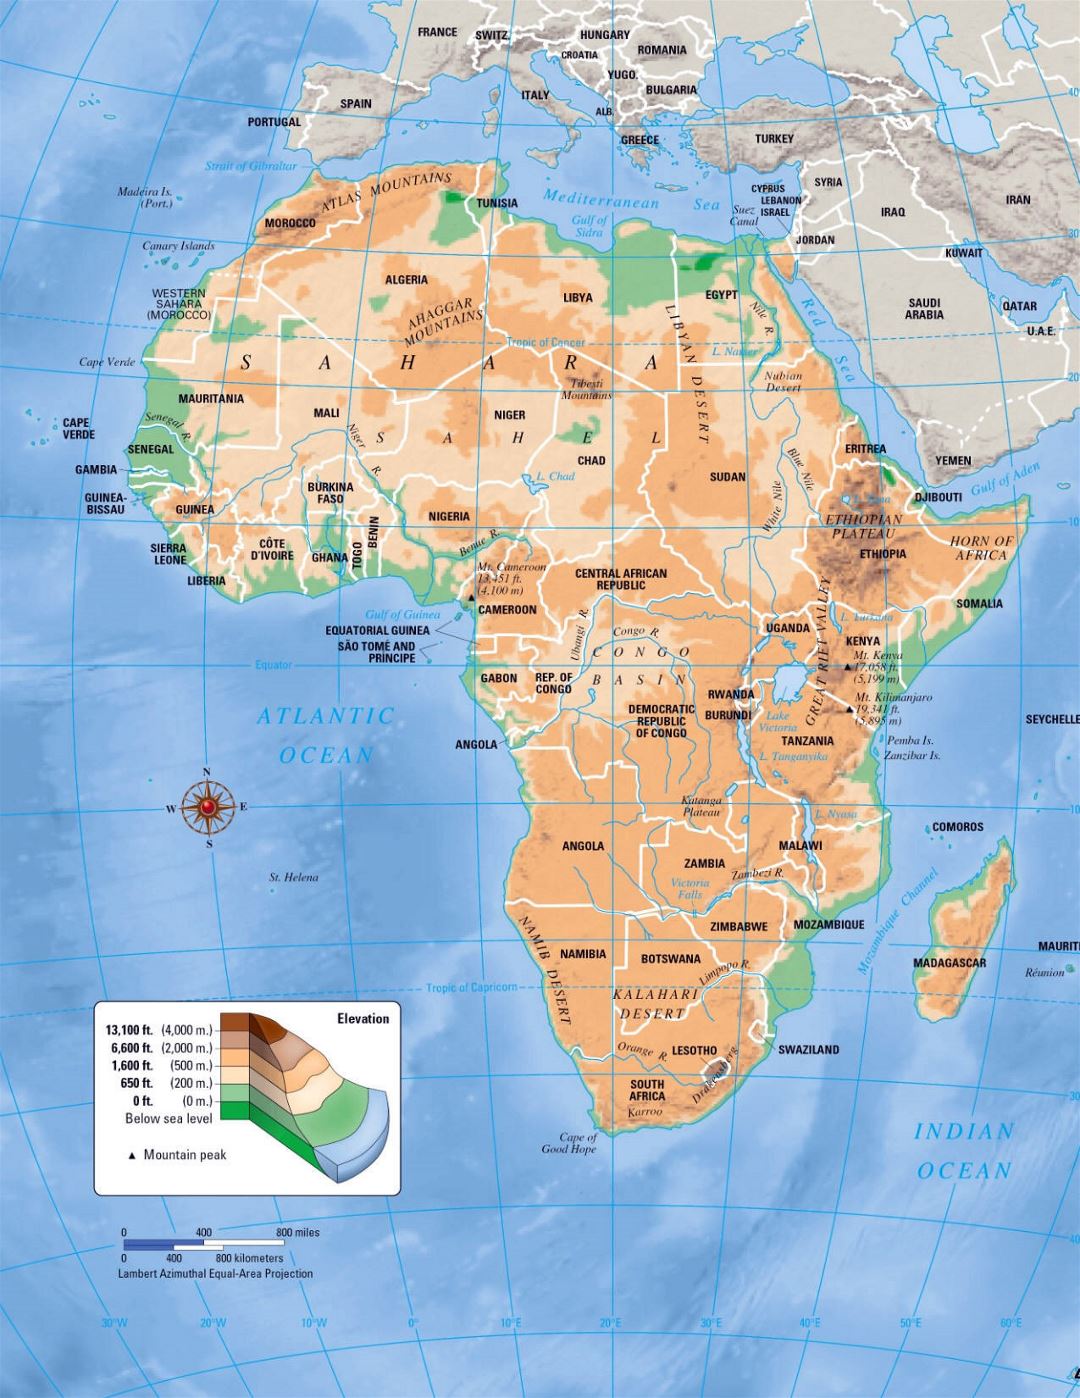 Large elevation map of Africa